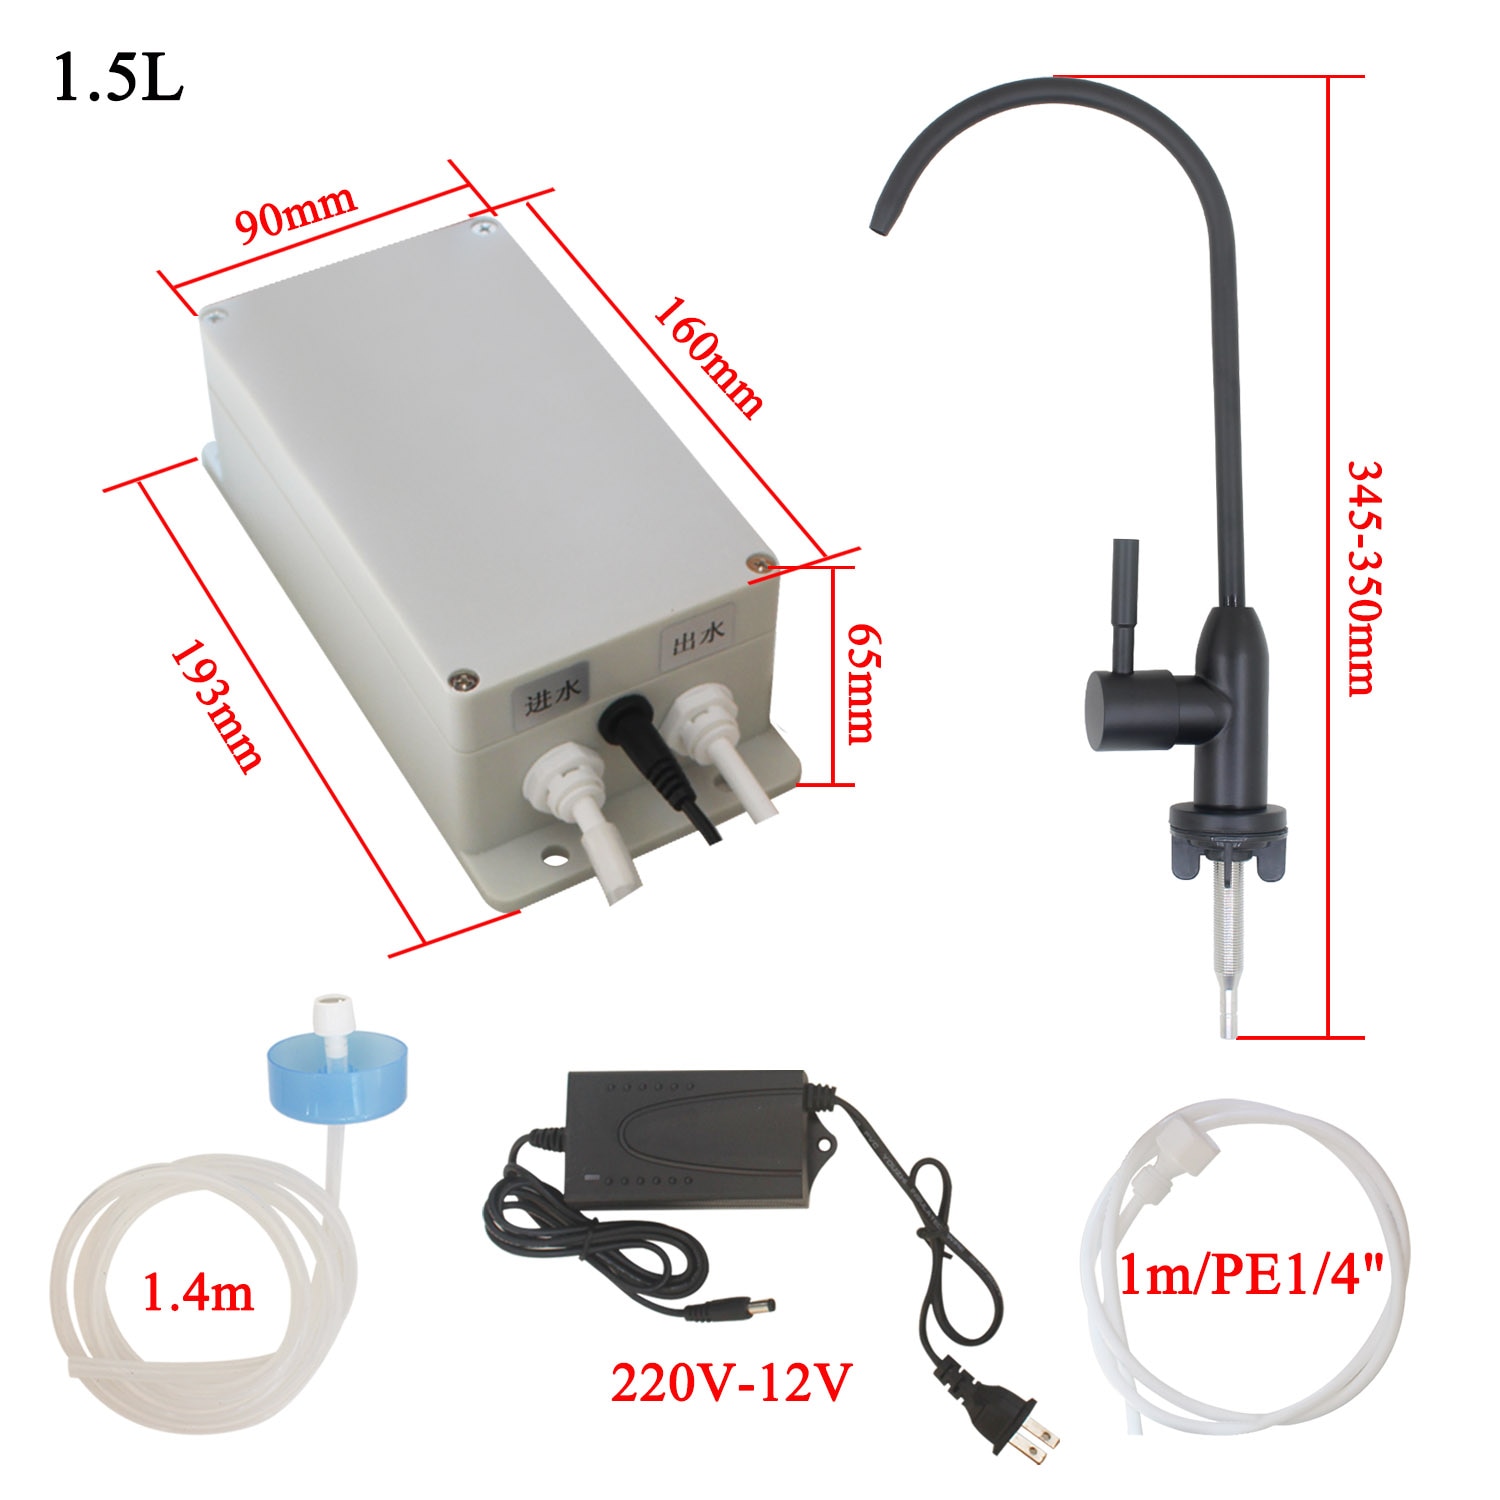 12V RV electric galley water pump & faucet automatic water suction pump clamp- boat caravan motorhome 1.5L/min - image 4 of 5